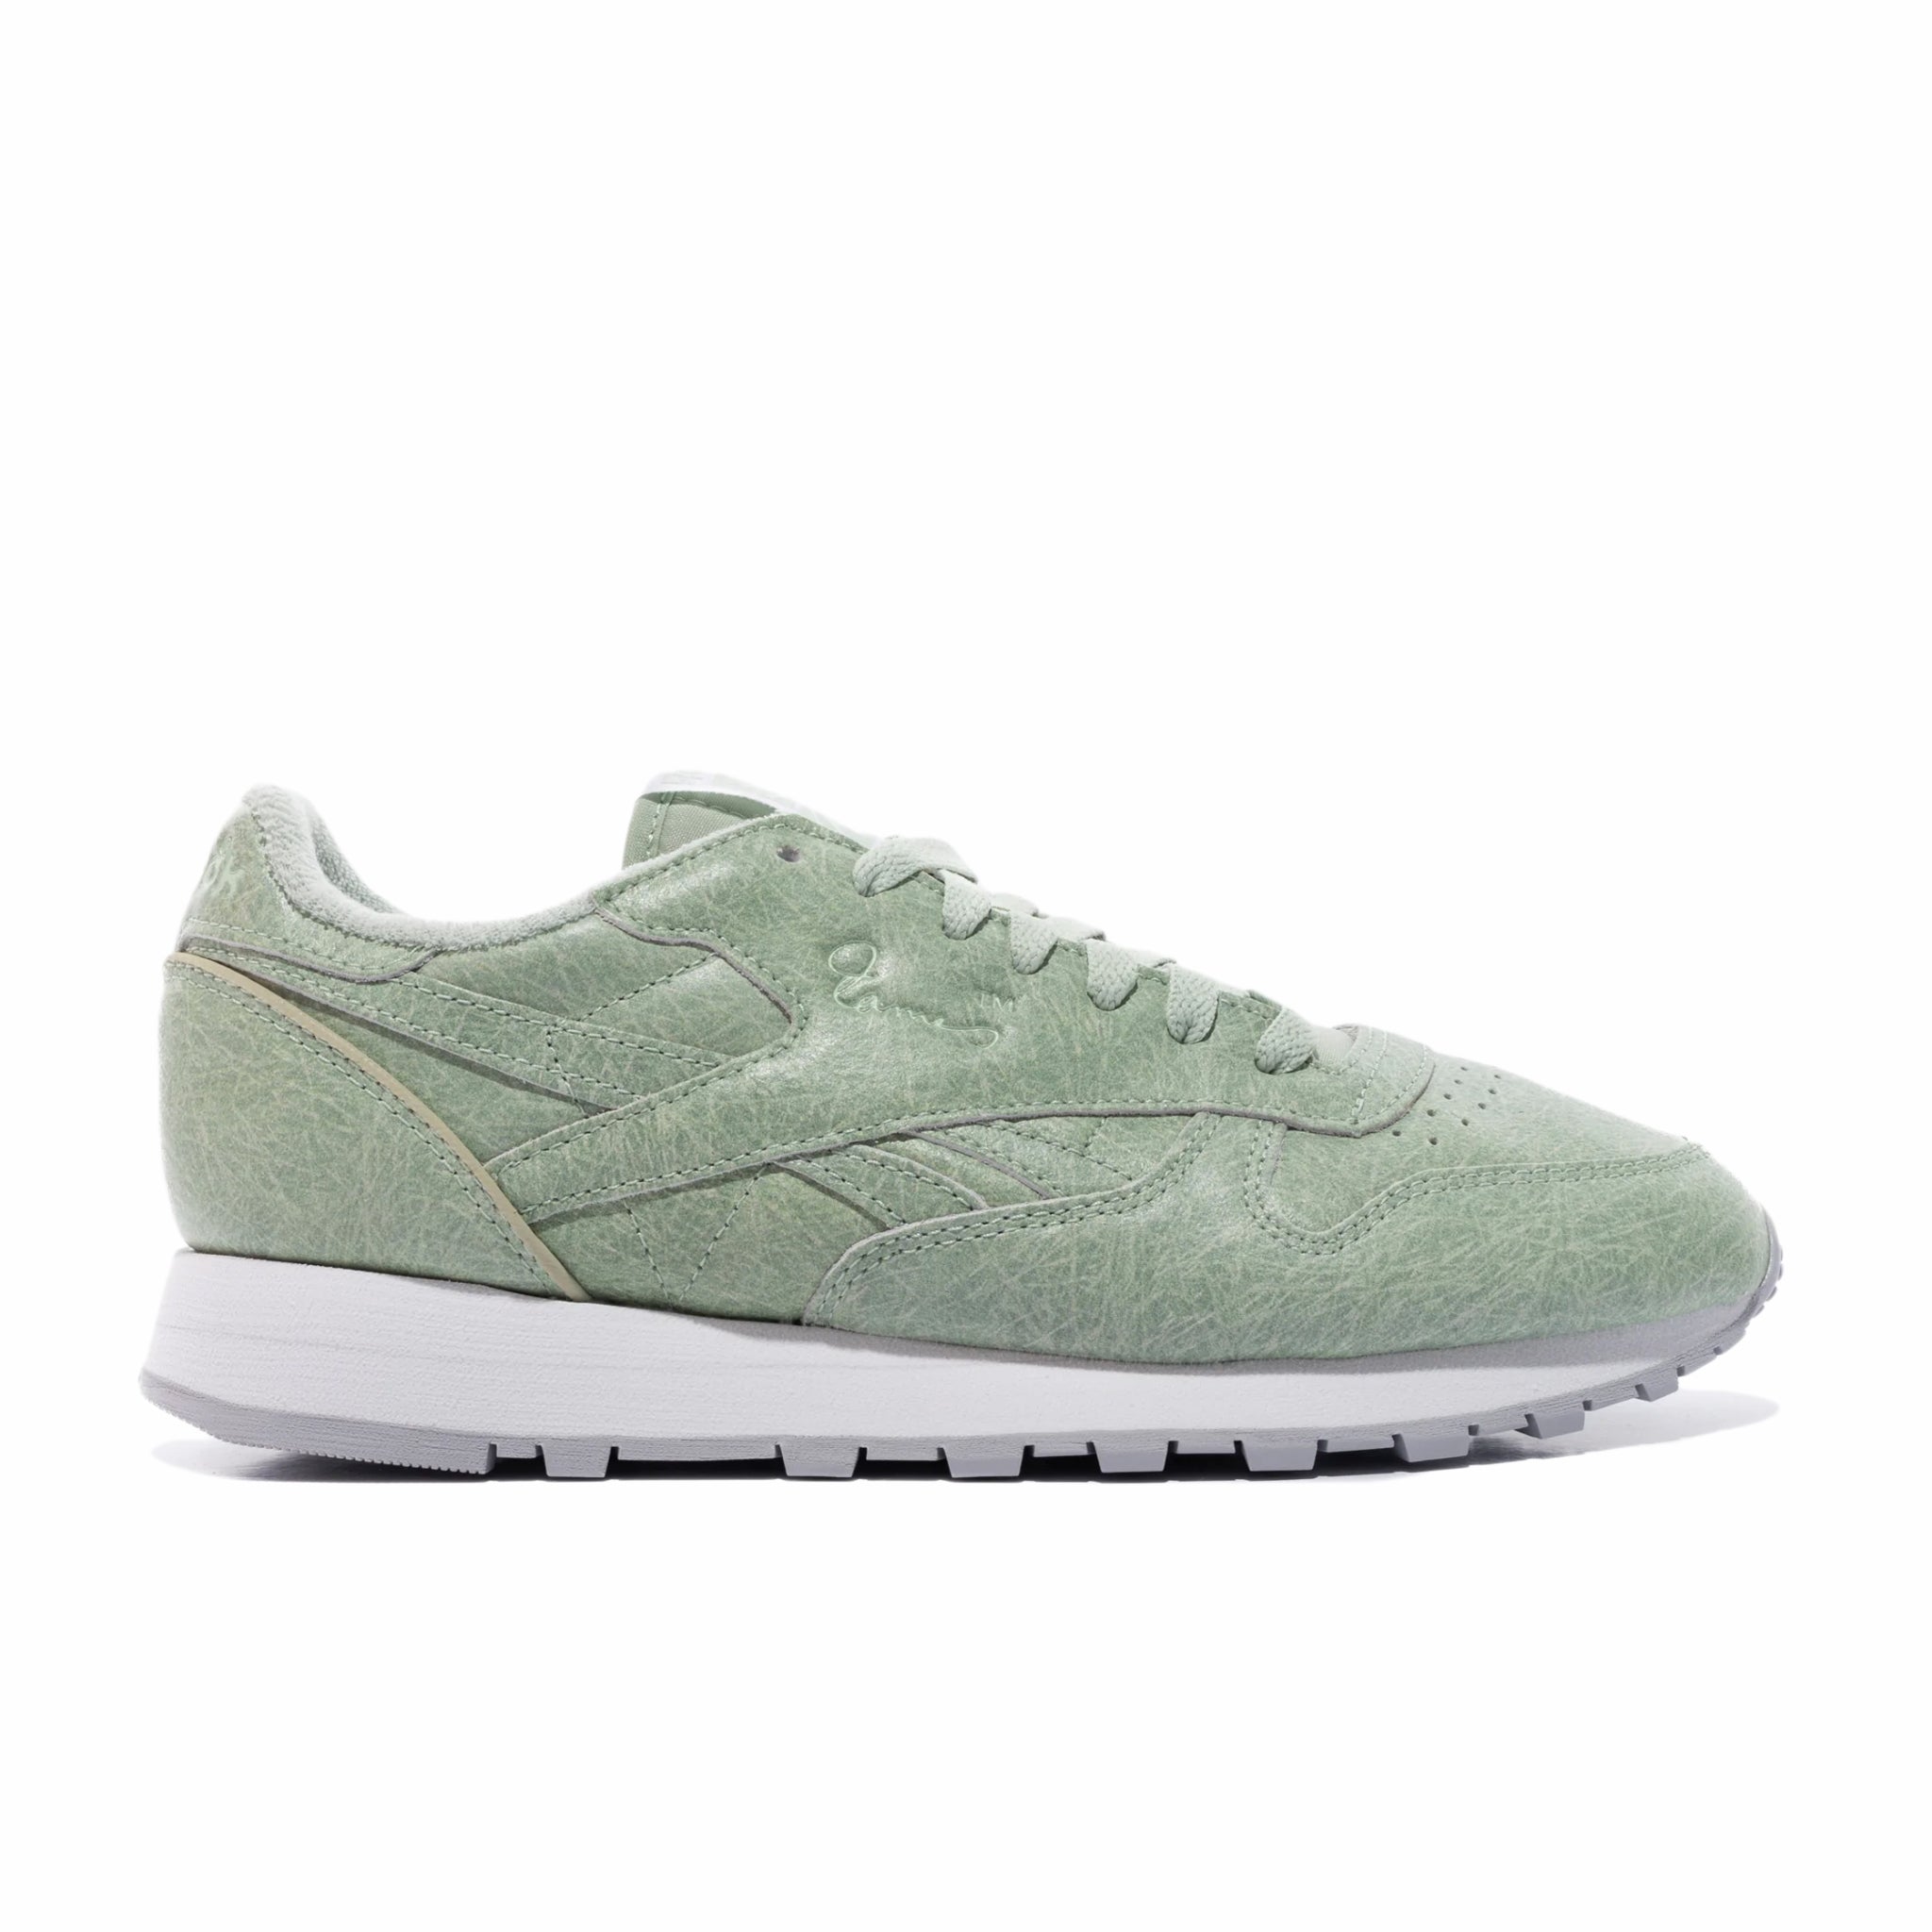 tarwe Beoefend Inzet August – Reebok "Eames" Classic Leather (Light Sage/FTWR White/CDGRY2)